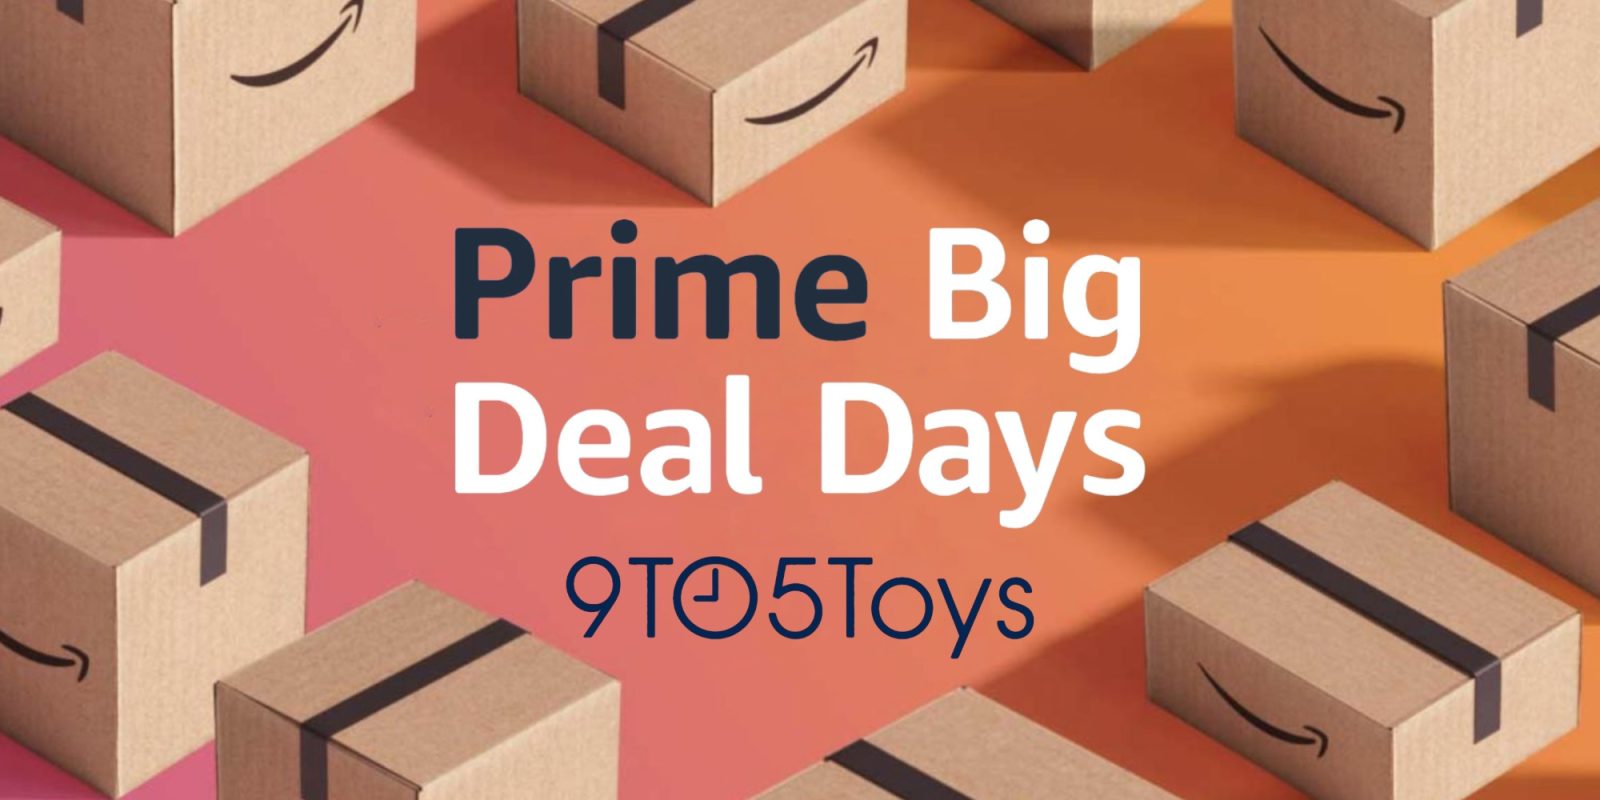  oelaio Prime Big Deal Days Prime Early Access Deals of The Day  Today Only, Recent Orders Placed by Me On Early Access Sale,   Clearance Items Outlet 90 Percent Off Army